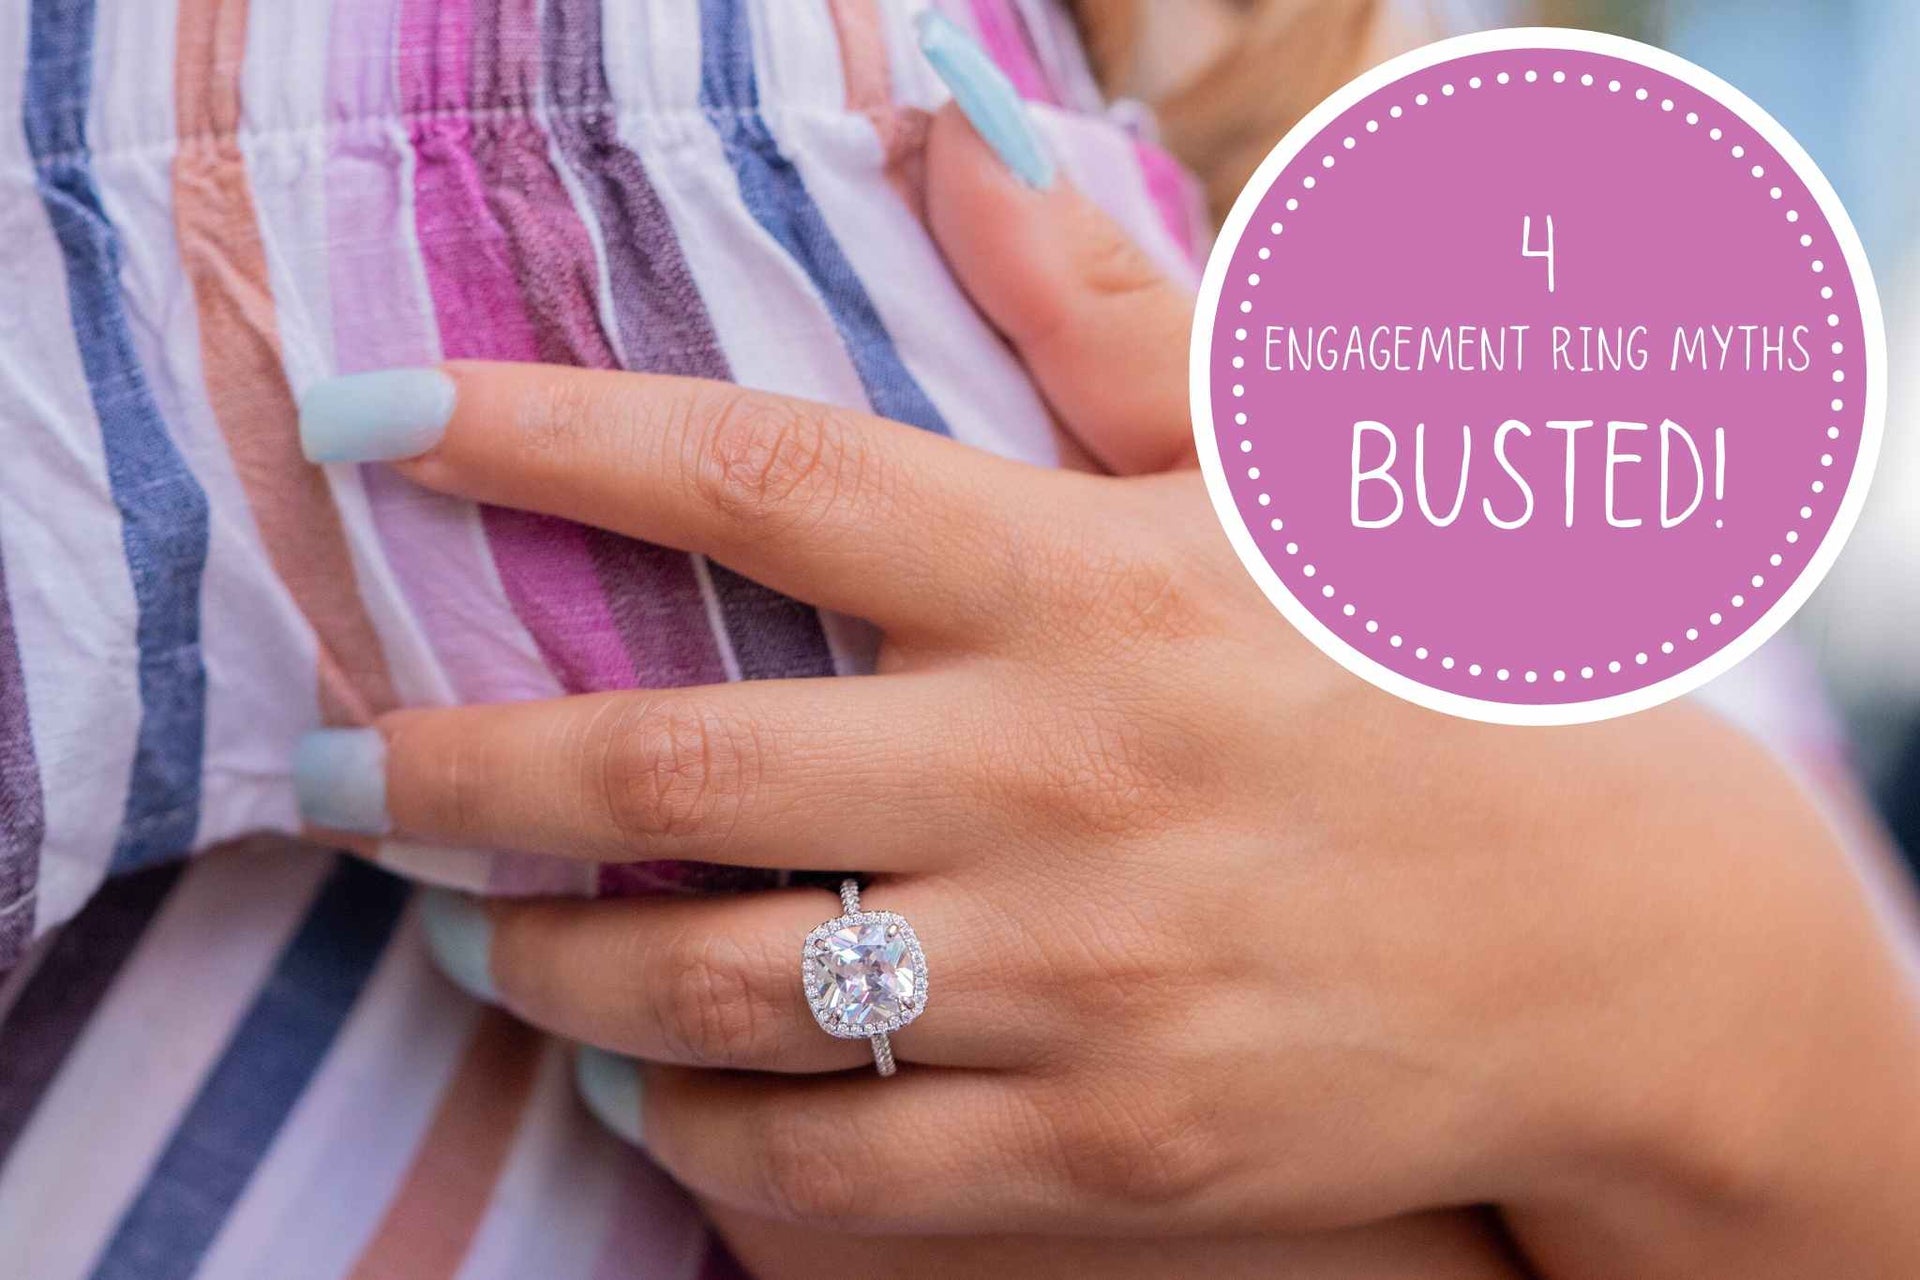 4 Engagement Ring Myths – Busted!